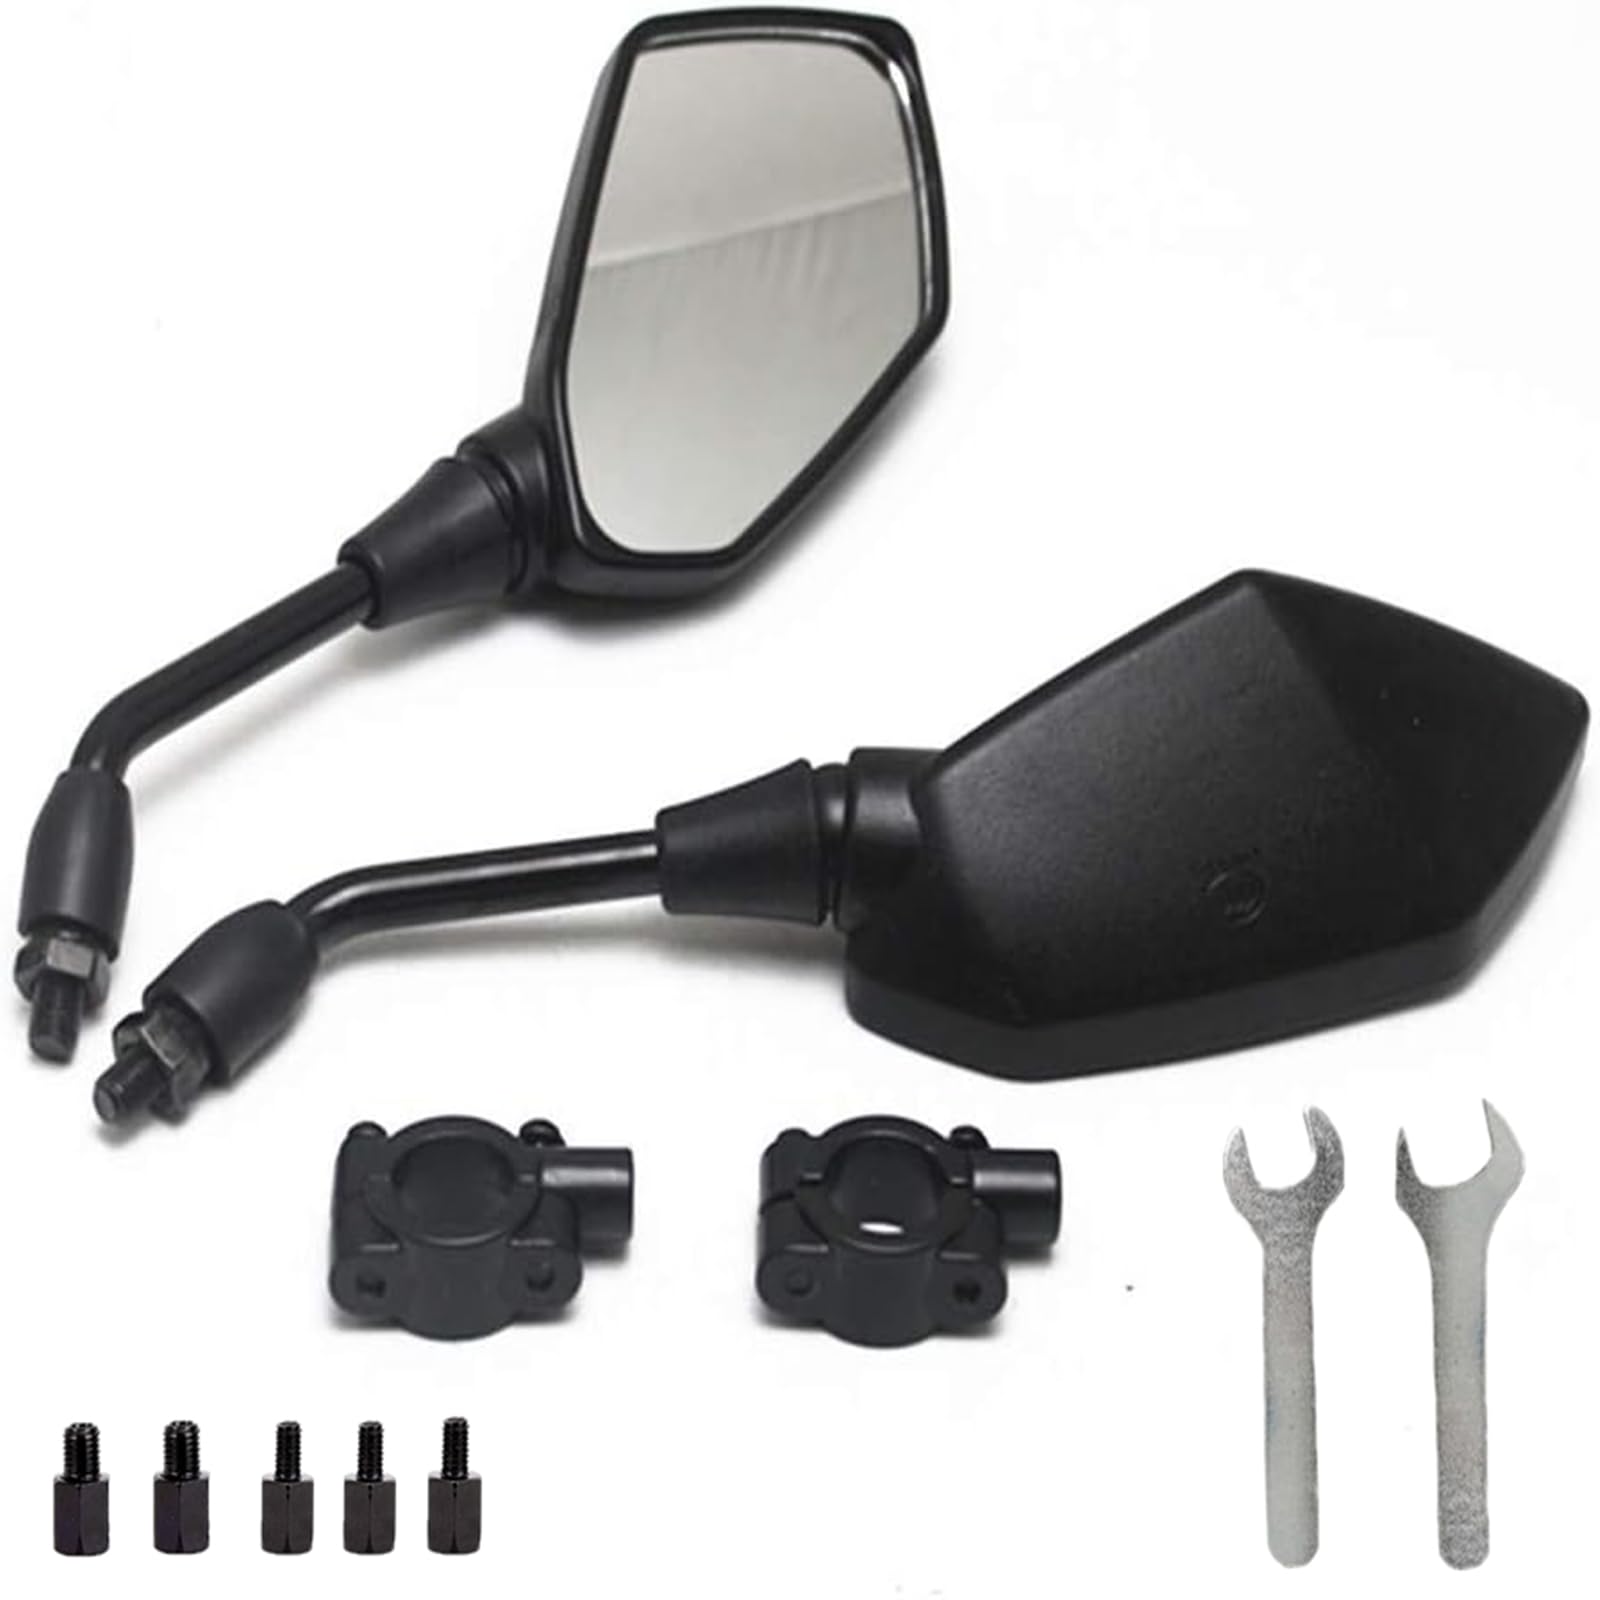 【2024 Upgraded】Motorcycle Convex Rear View Mirror, Mirrors For Bike,motorcycle,atv,scooter, with M8 M10 Threaded Bolt, with 7/8" Handle Bar Mount Clamp Compatible with Cruiser, Suzuki, Honda,Victory